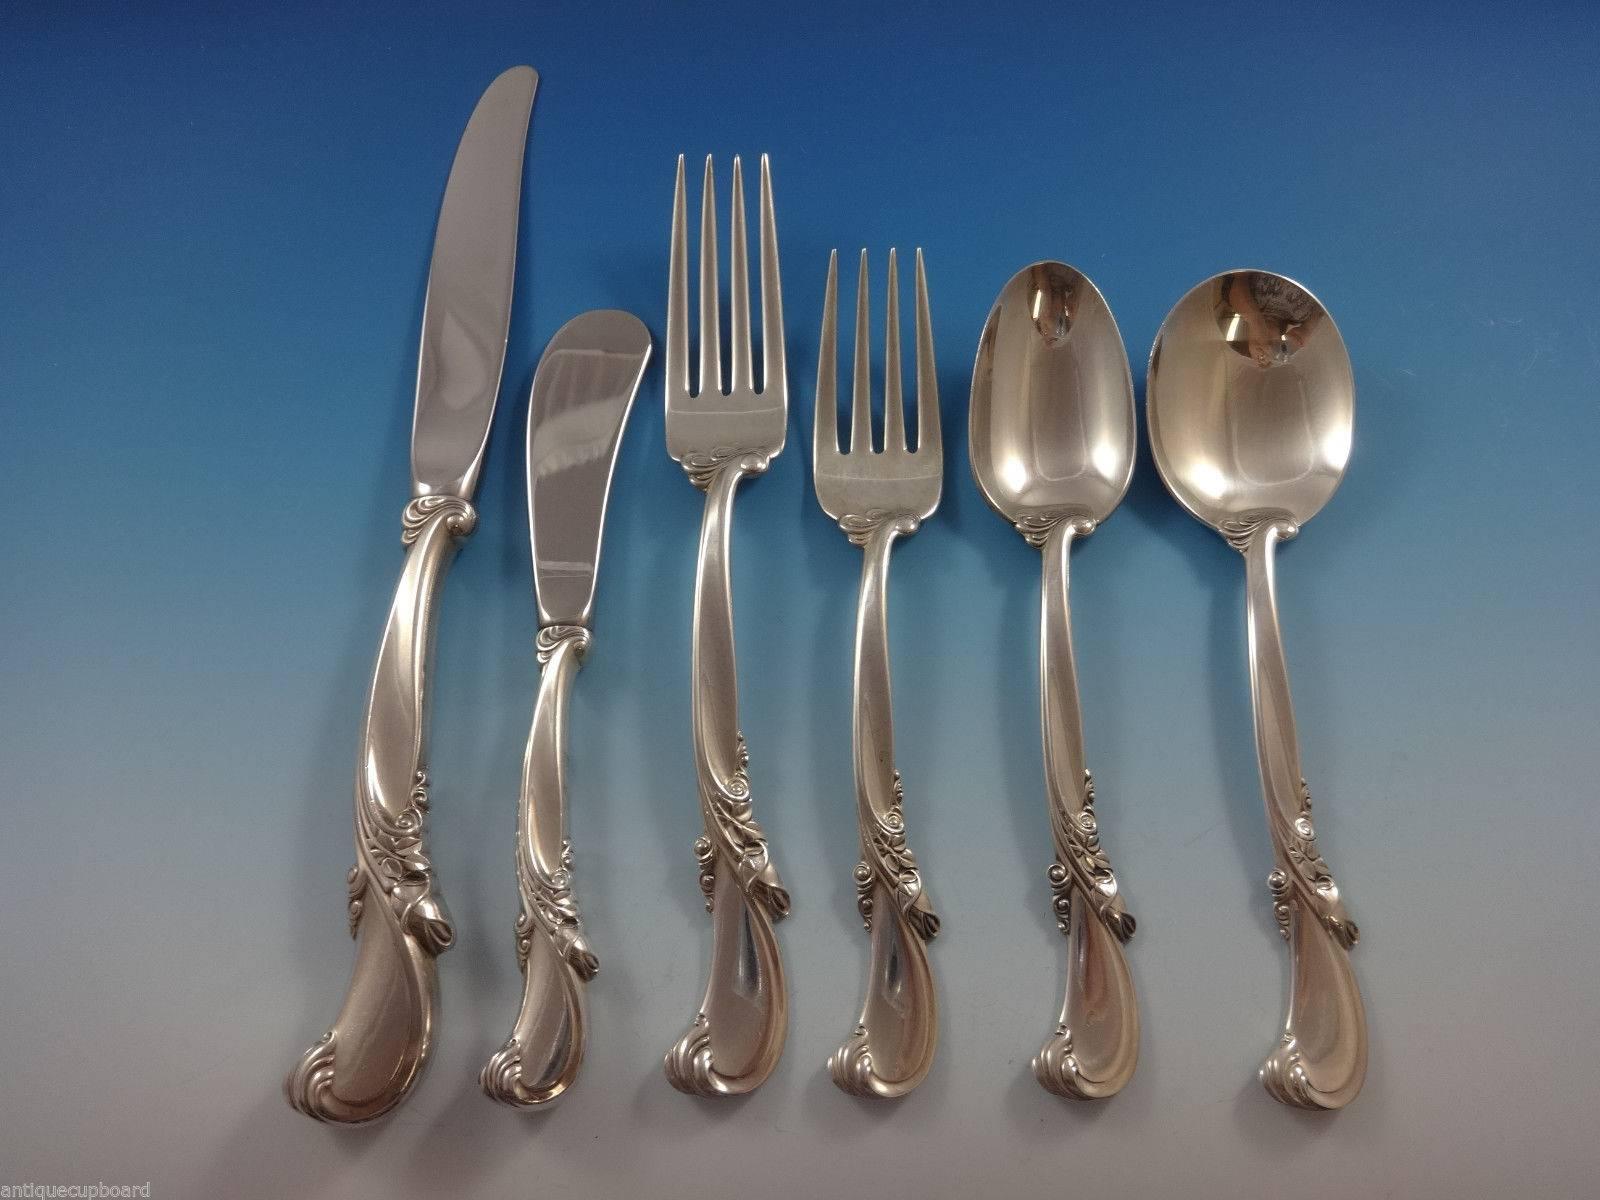 Stunning Waltz of Spring by Wallace Sterling Silver flatware set, 53 pieces. This set includes:

Eight knives, 8 7/8